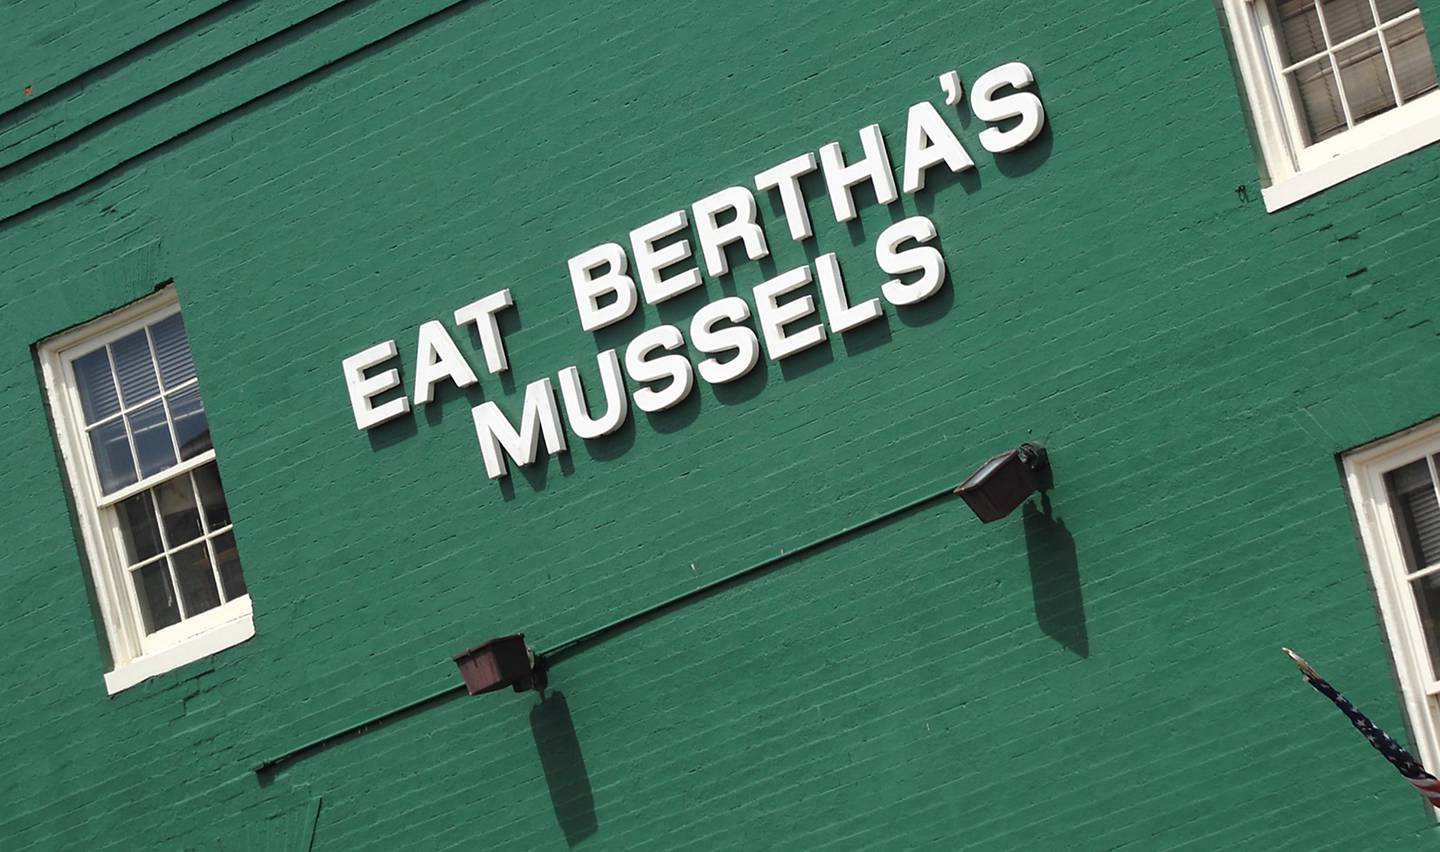 A Fells Point mainstay for the past 50 years, Bertha's Mussels, known for its minimalistic "Eat Bertha's Mussels" stickers, announced it is closing.